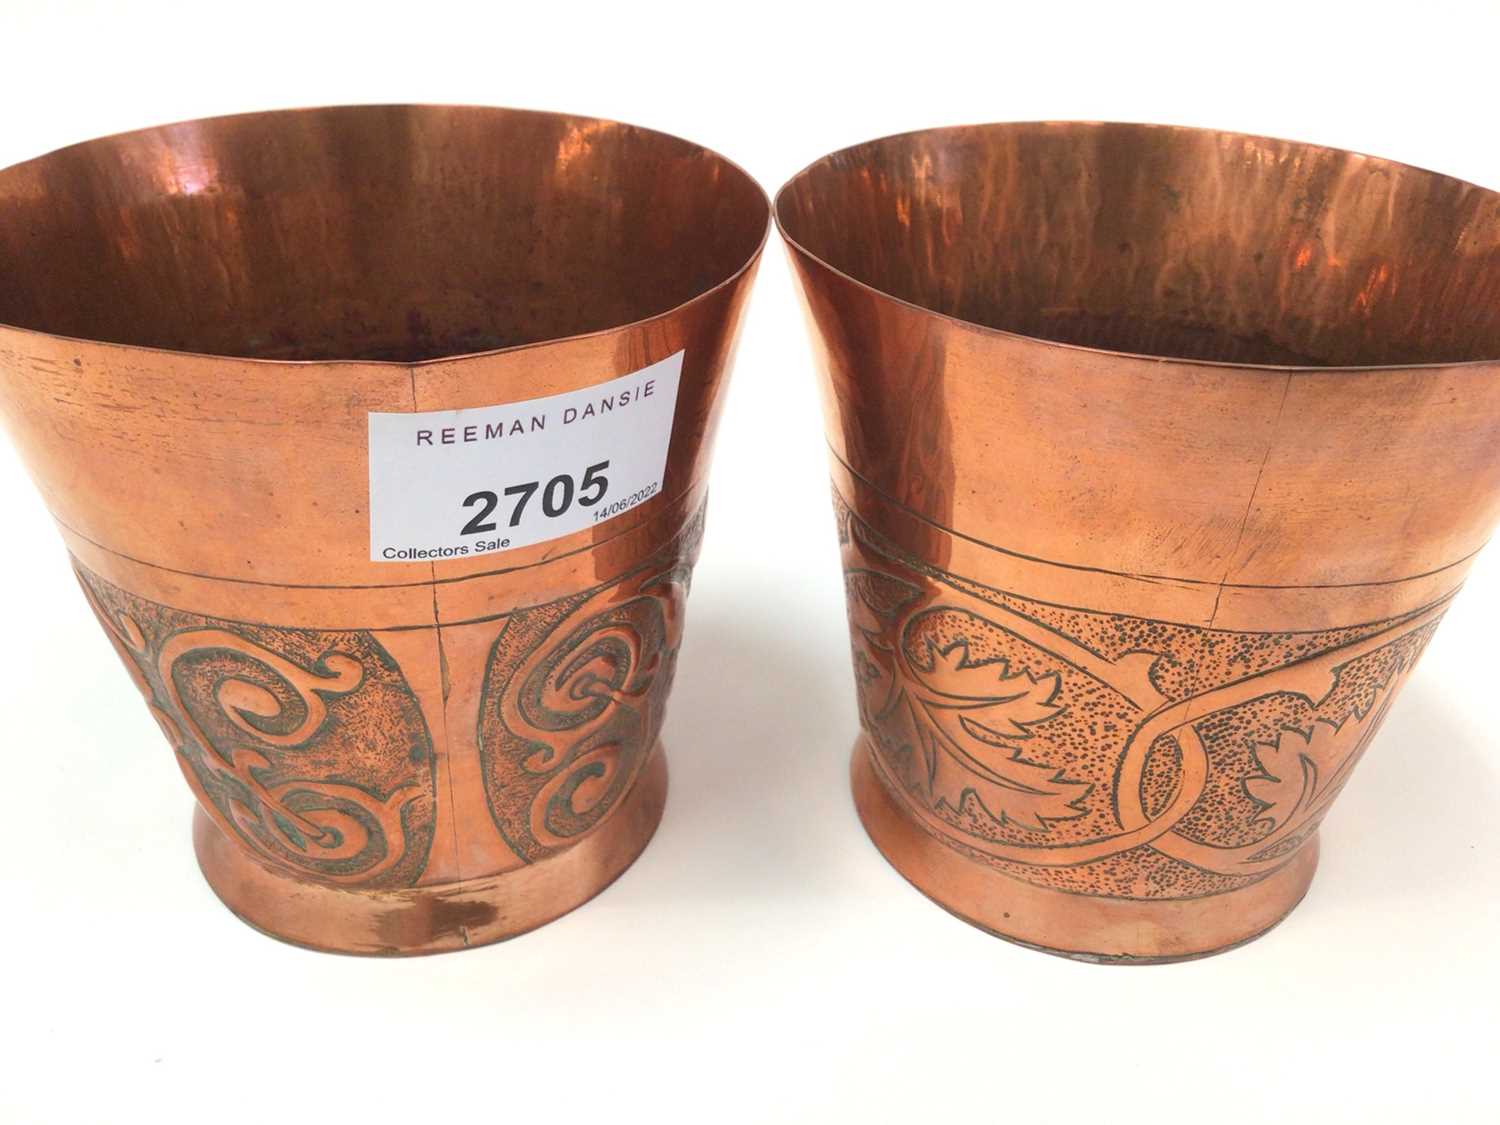 Pair of Arts & Crafts copper beakers by Keswick School of Industrial Arts - Image 4 of 4